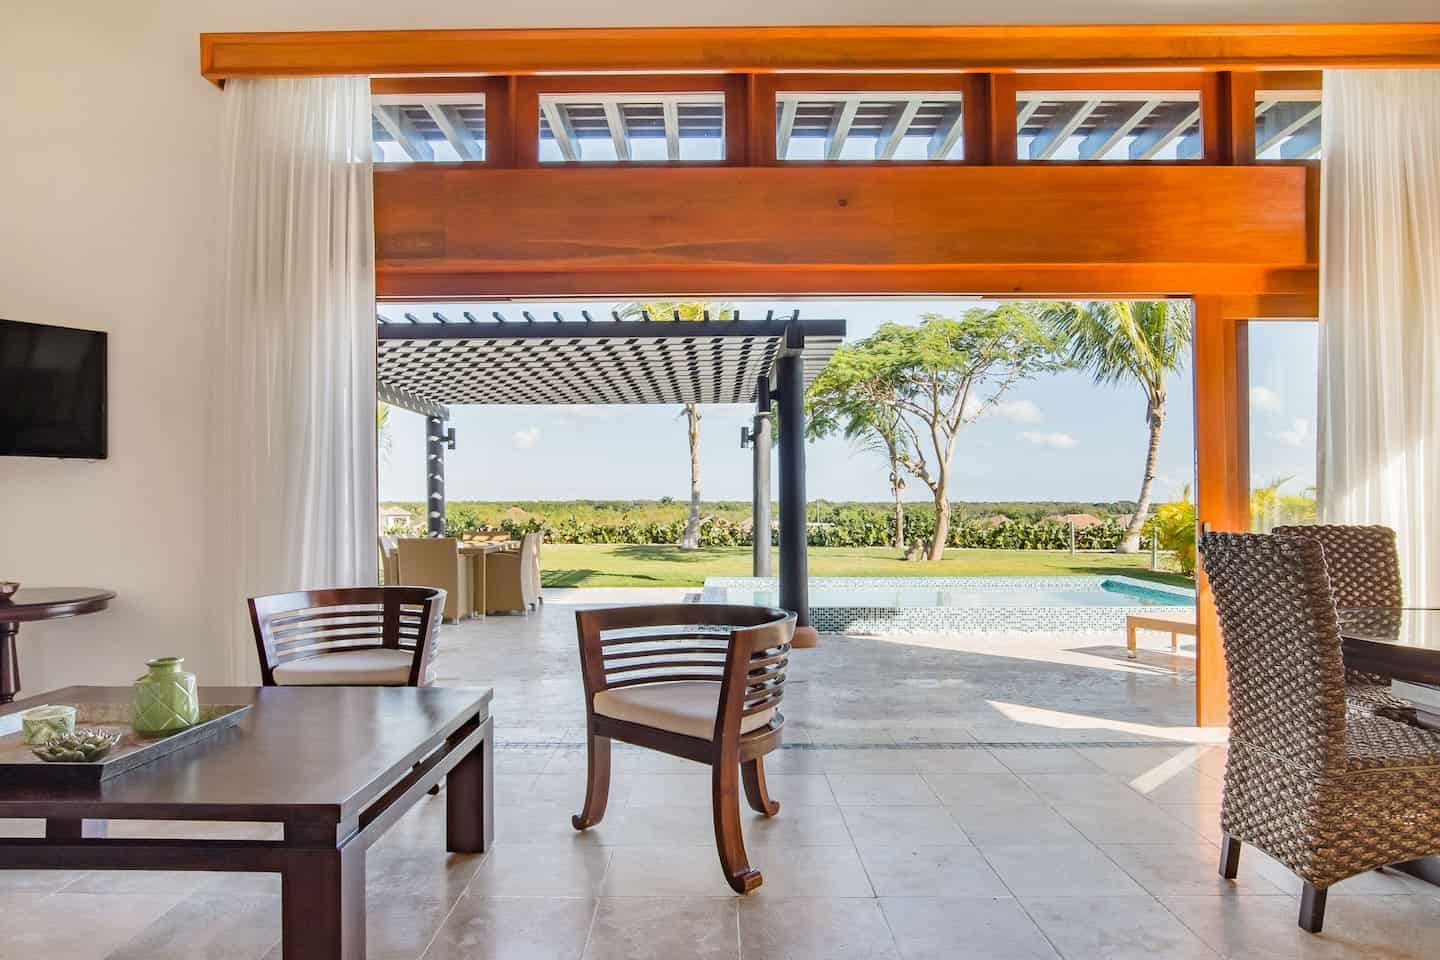 Image of Airbnb rental in Punta Cana, Dominican Republic